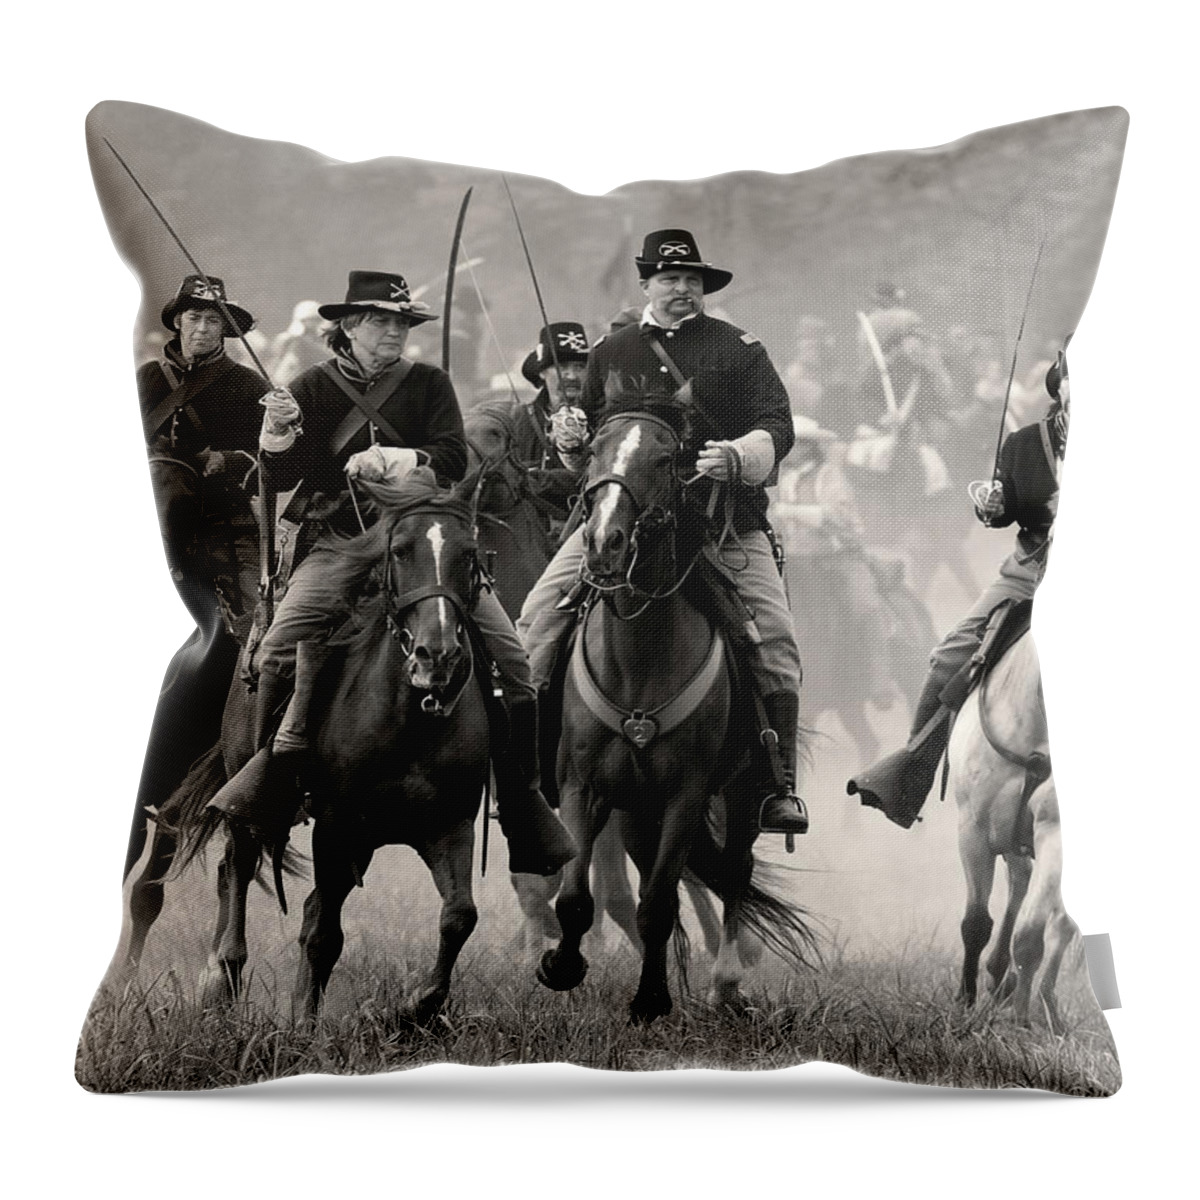 Reenactment Throw Pillow featuring the photograph Cavalry Skirmish by Art Cole